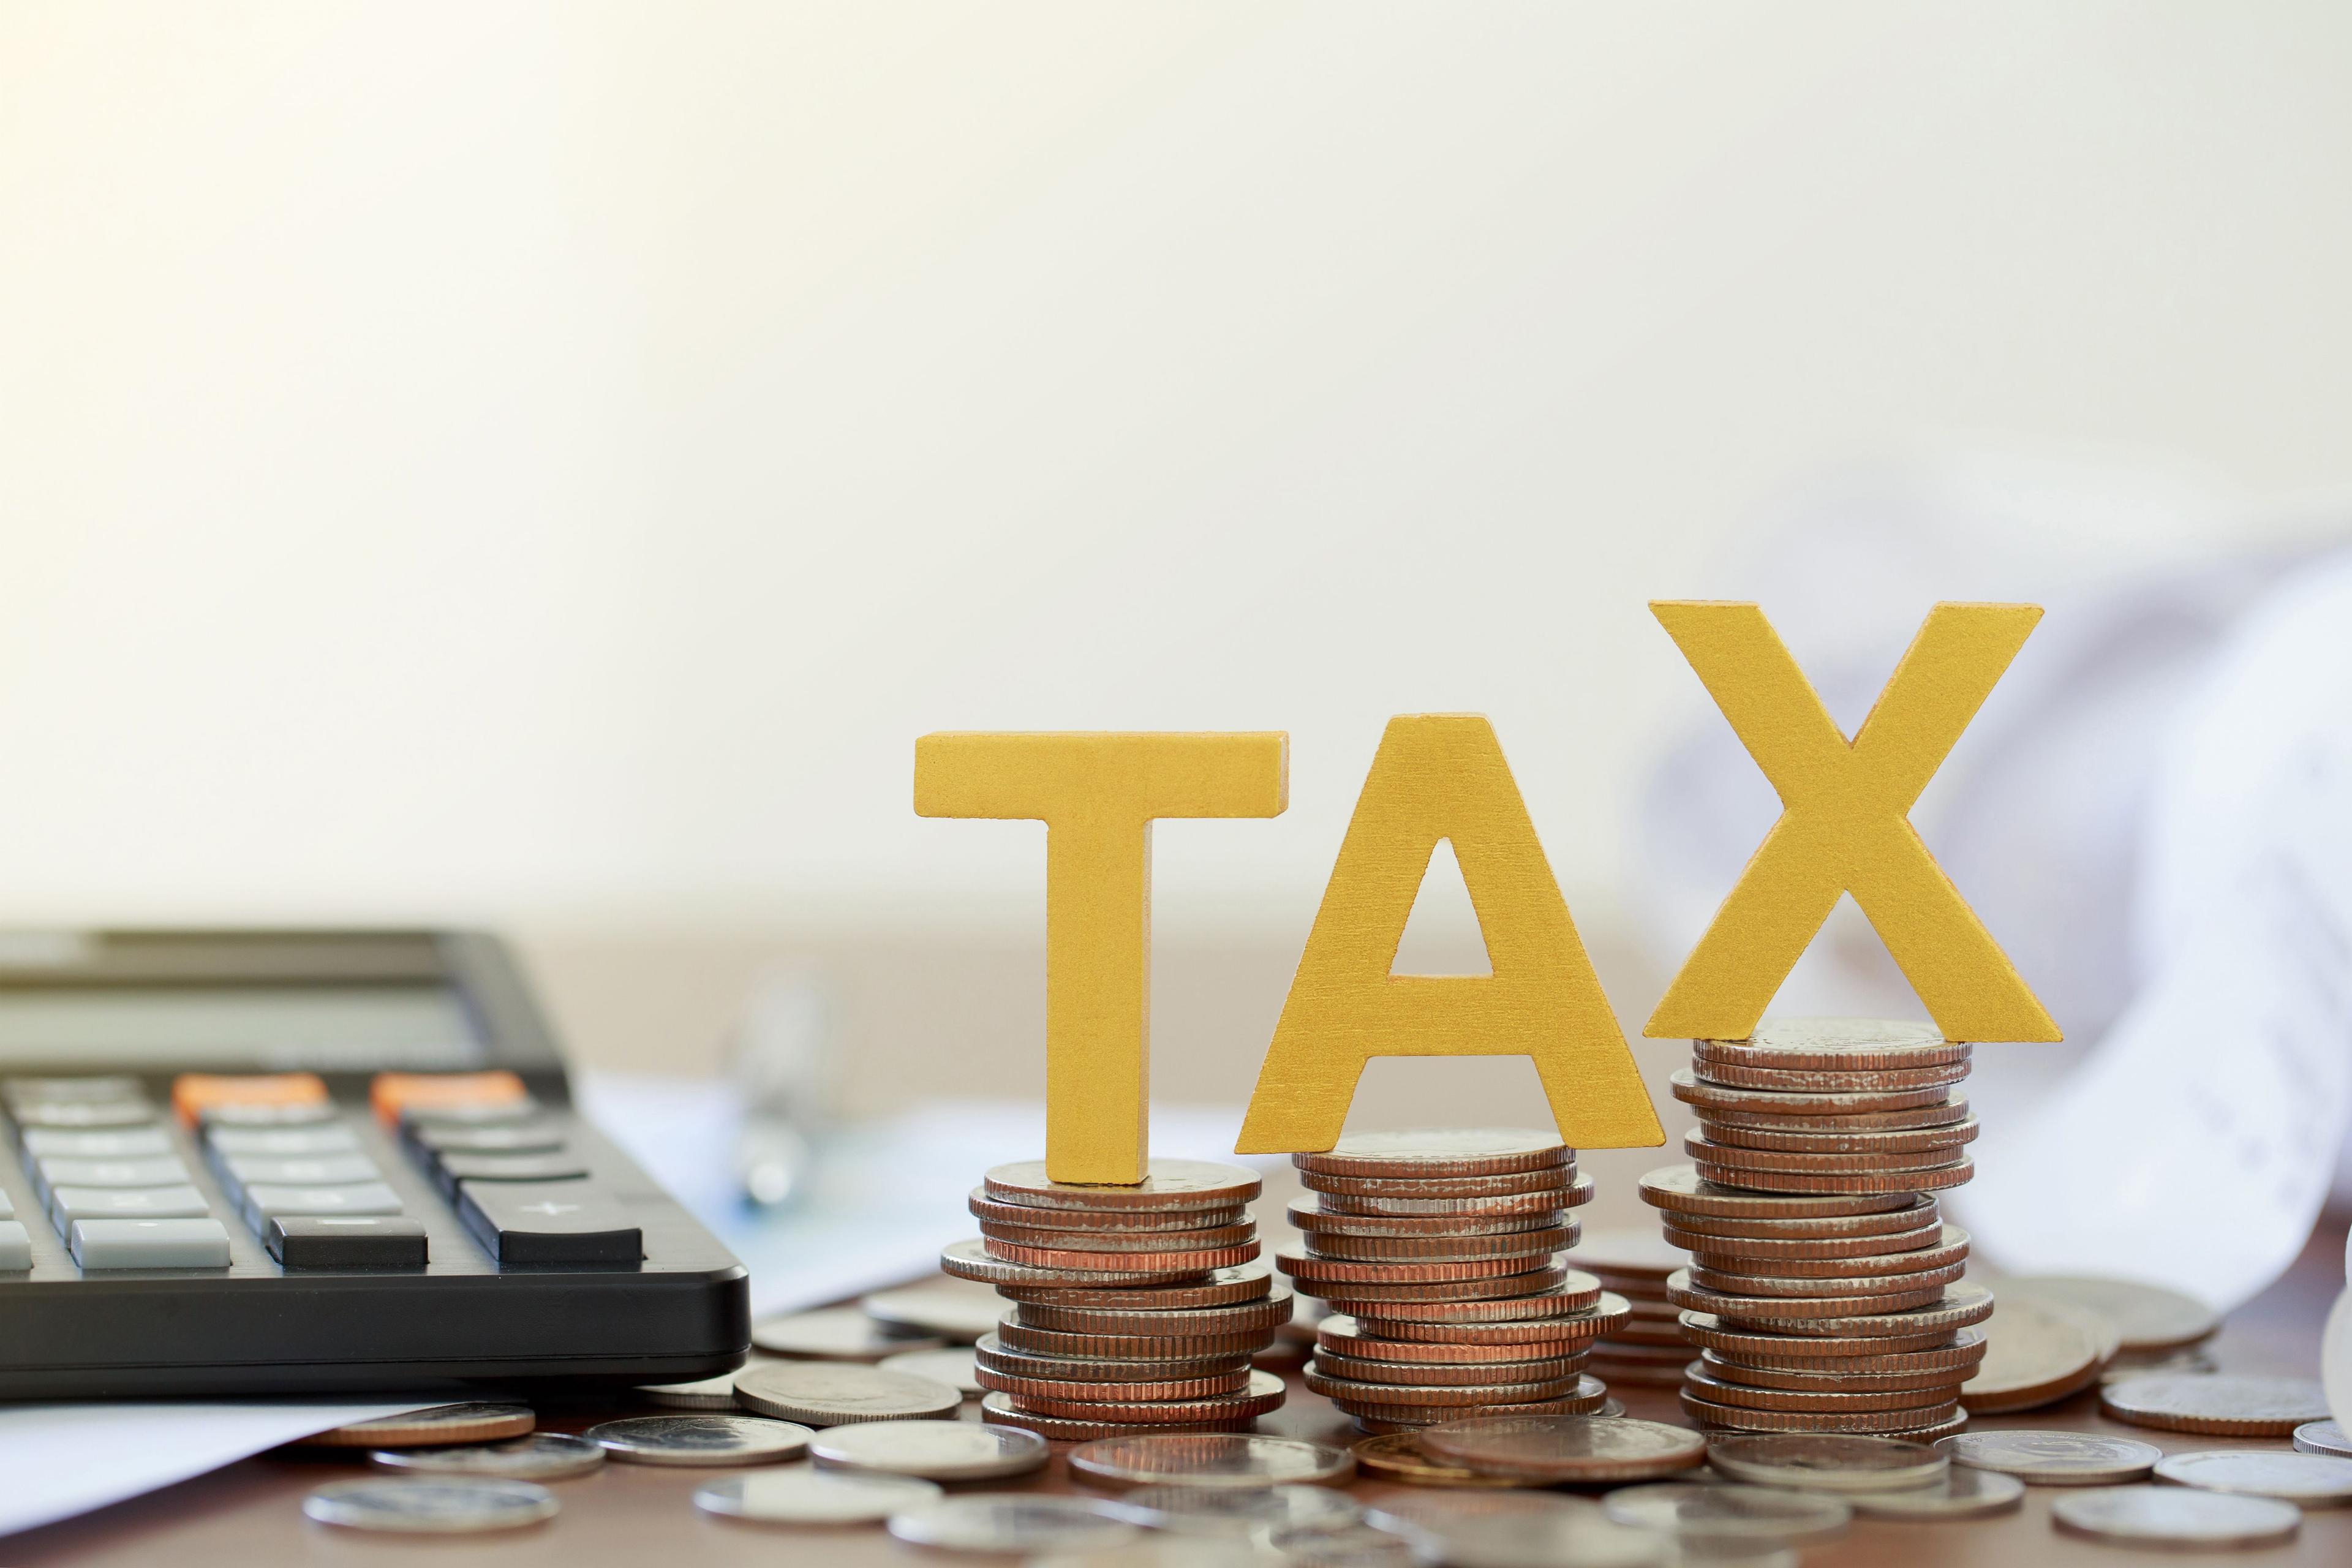 Hong Kong's Two-tier Profits Tax System